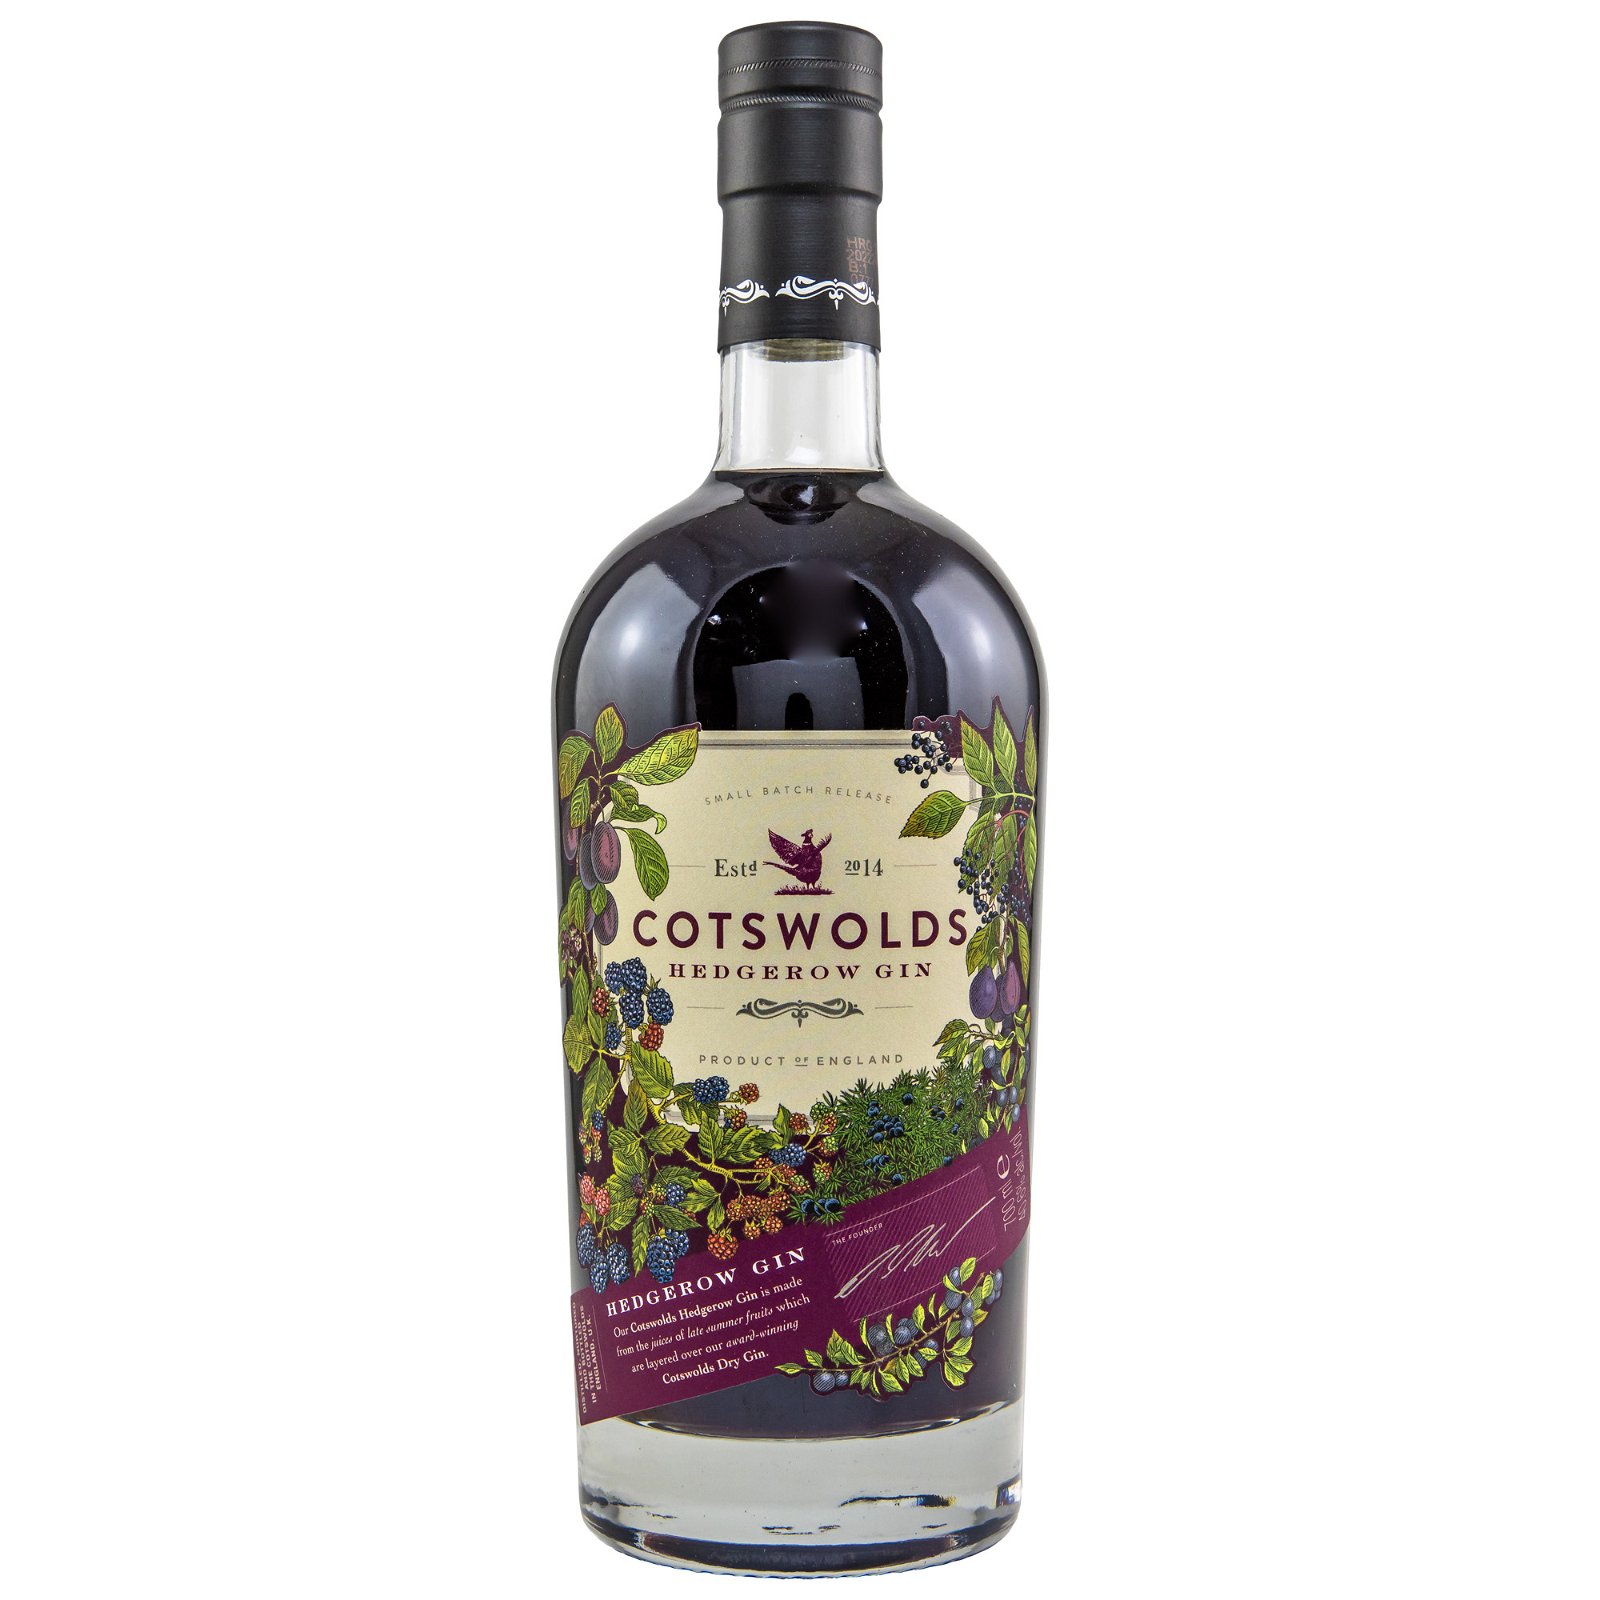 Cotswolds Hedgerow Gin